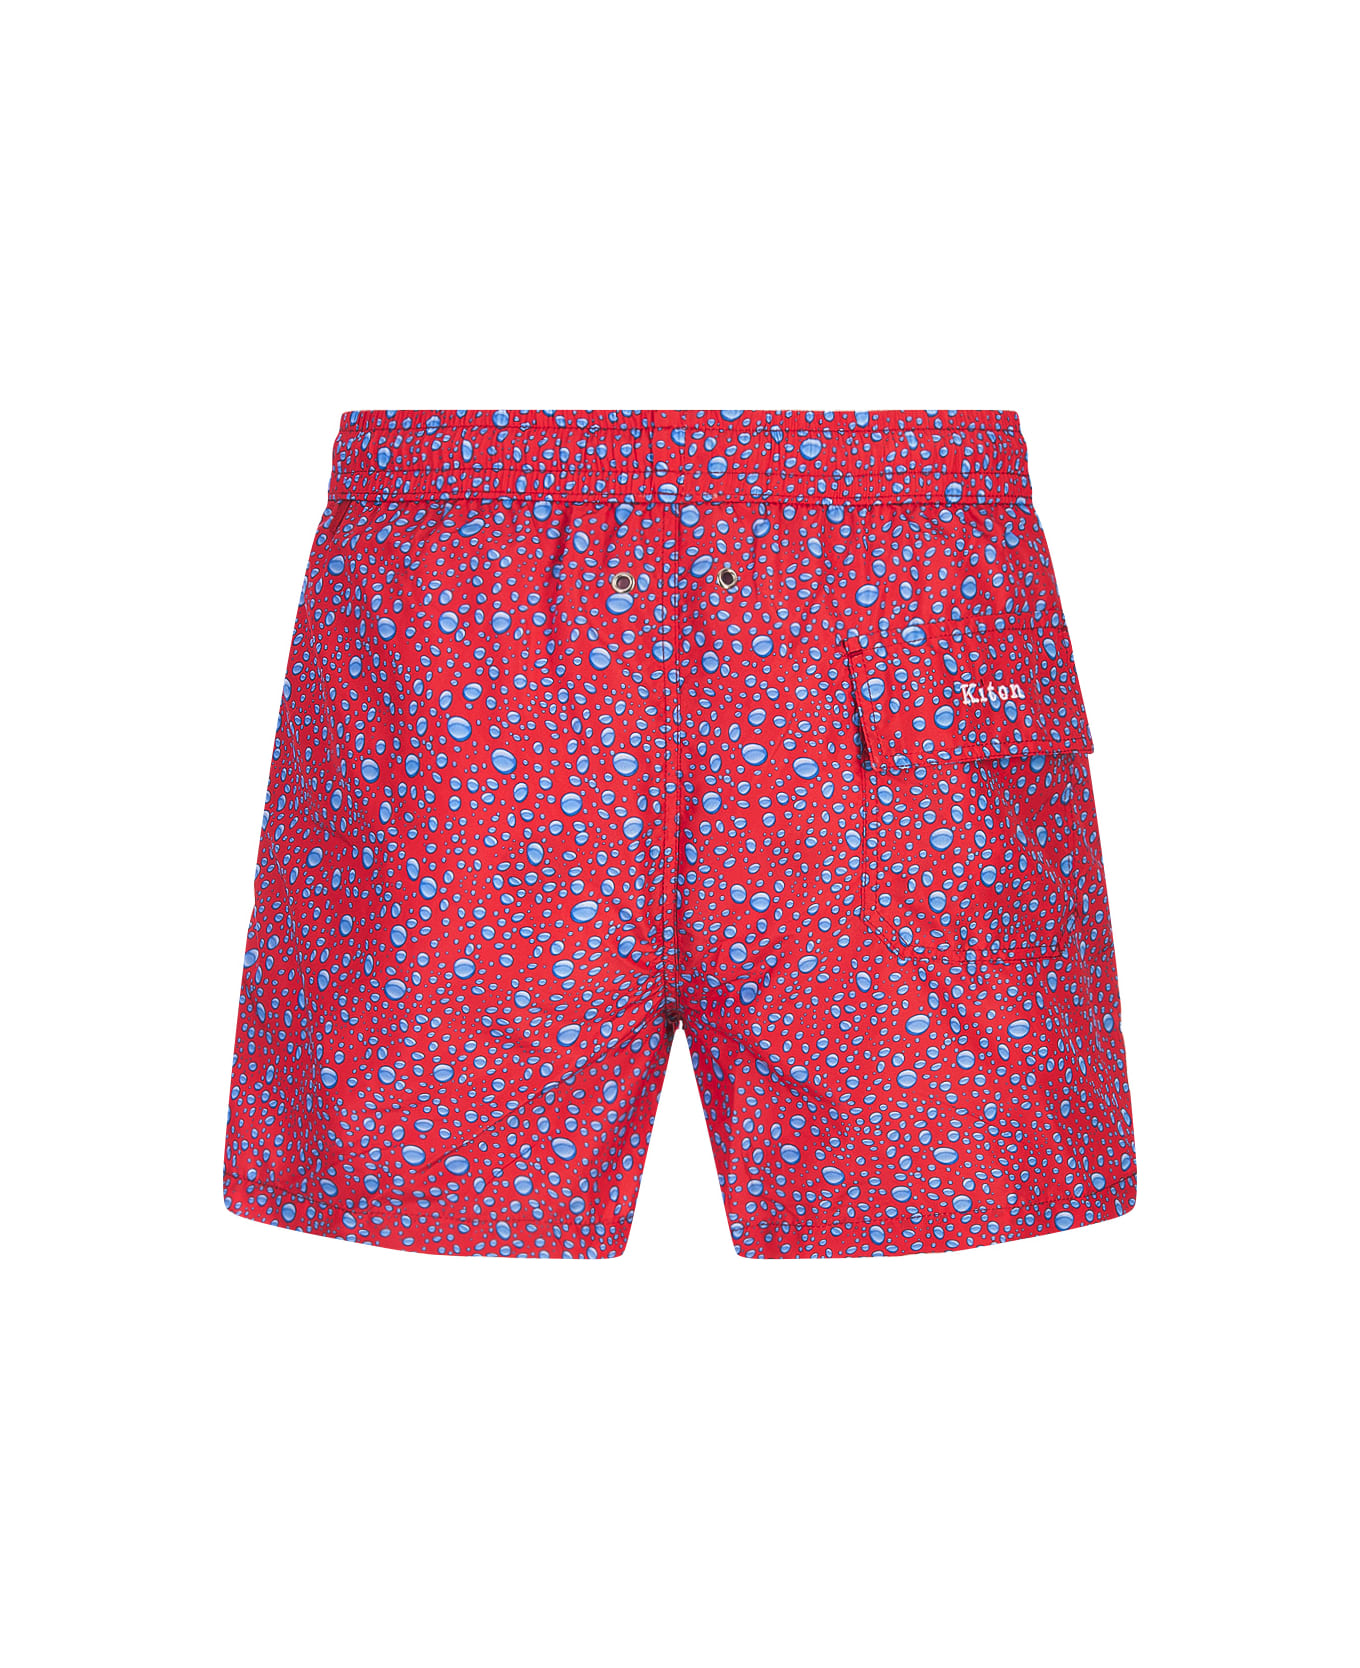 Kiton Red Swim Shorts With Water Drops Pattern - Red